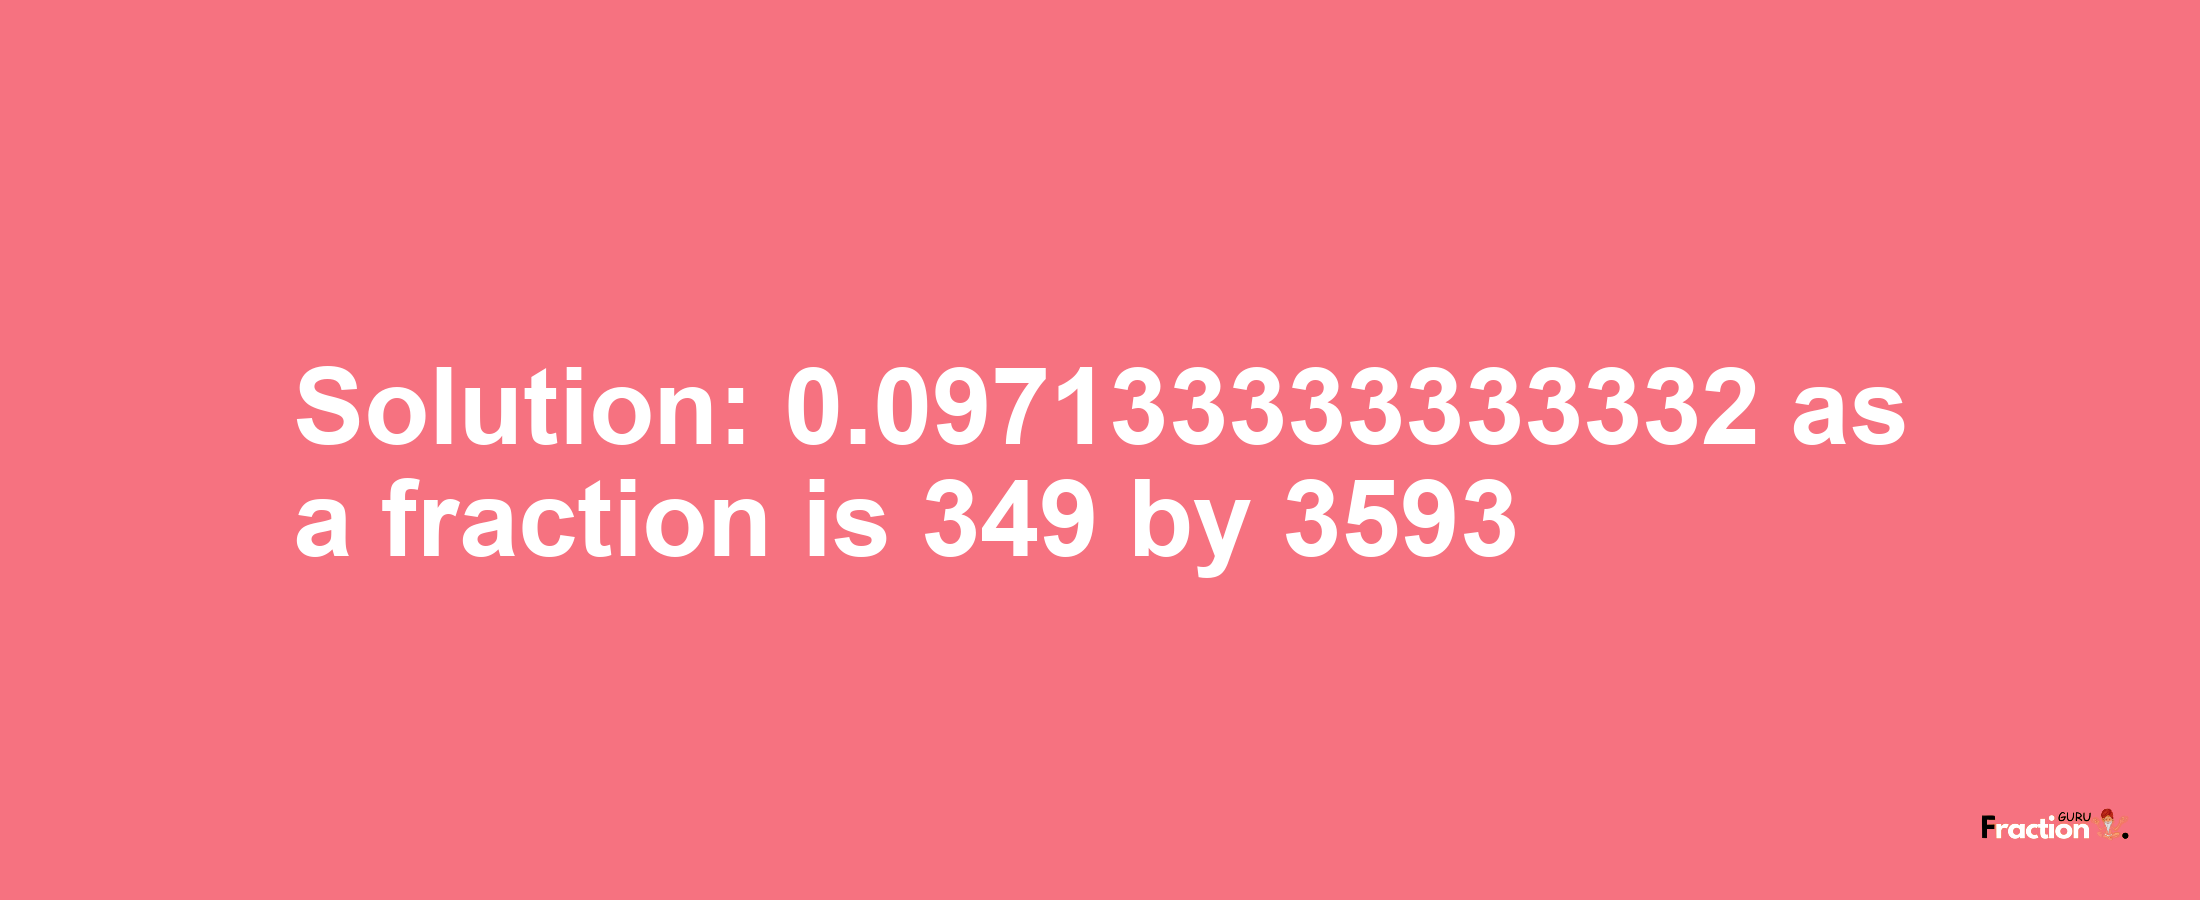 Solution:0.097133333333332 as a fraction is 349/3593